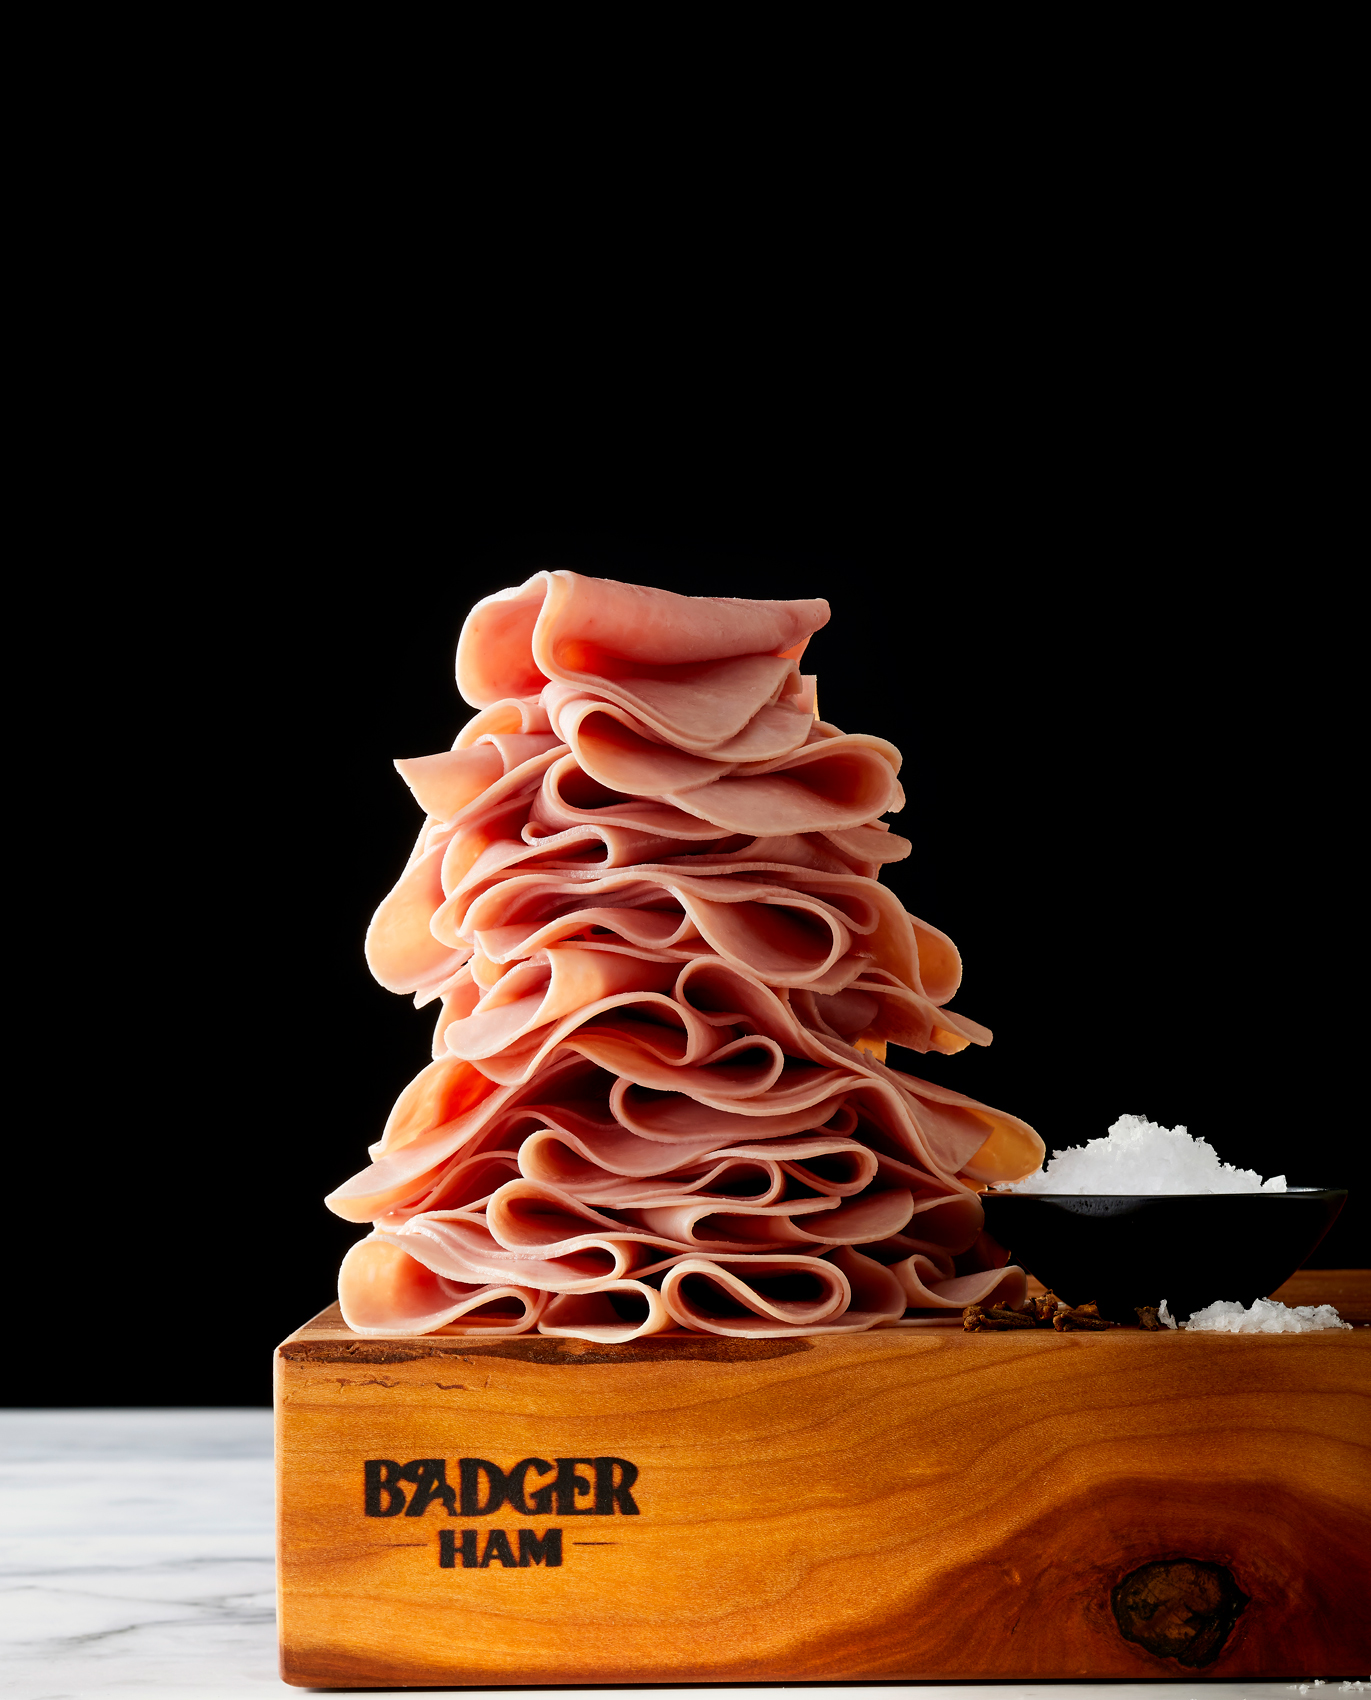 Badger Ham, stack of sliced ham photo by Chris Kessler Photography.  Chris Kessler is a freelance Photographer based in Milwaukee Wisconsin. Specializing in Food photography and portraiture.